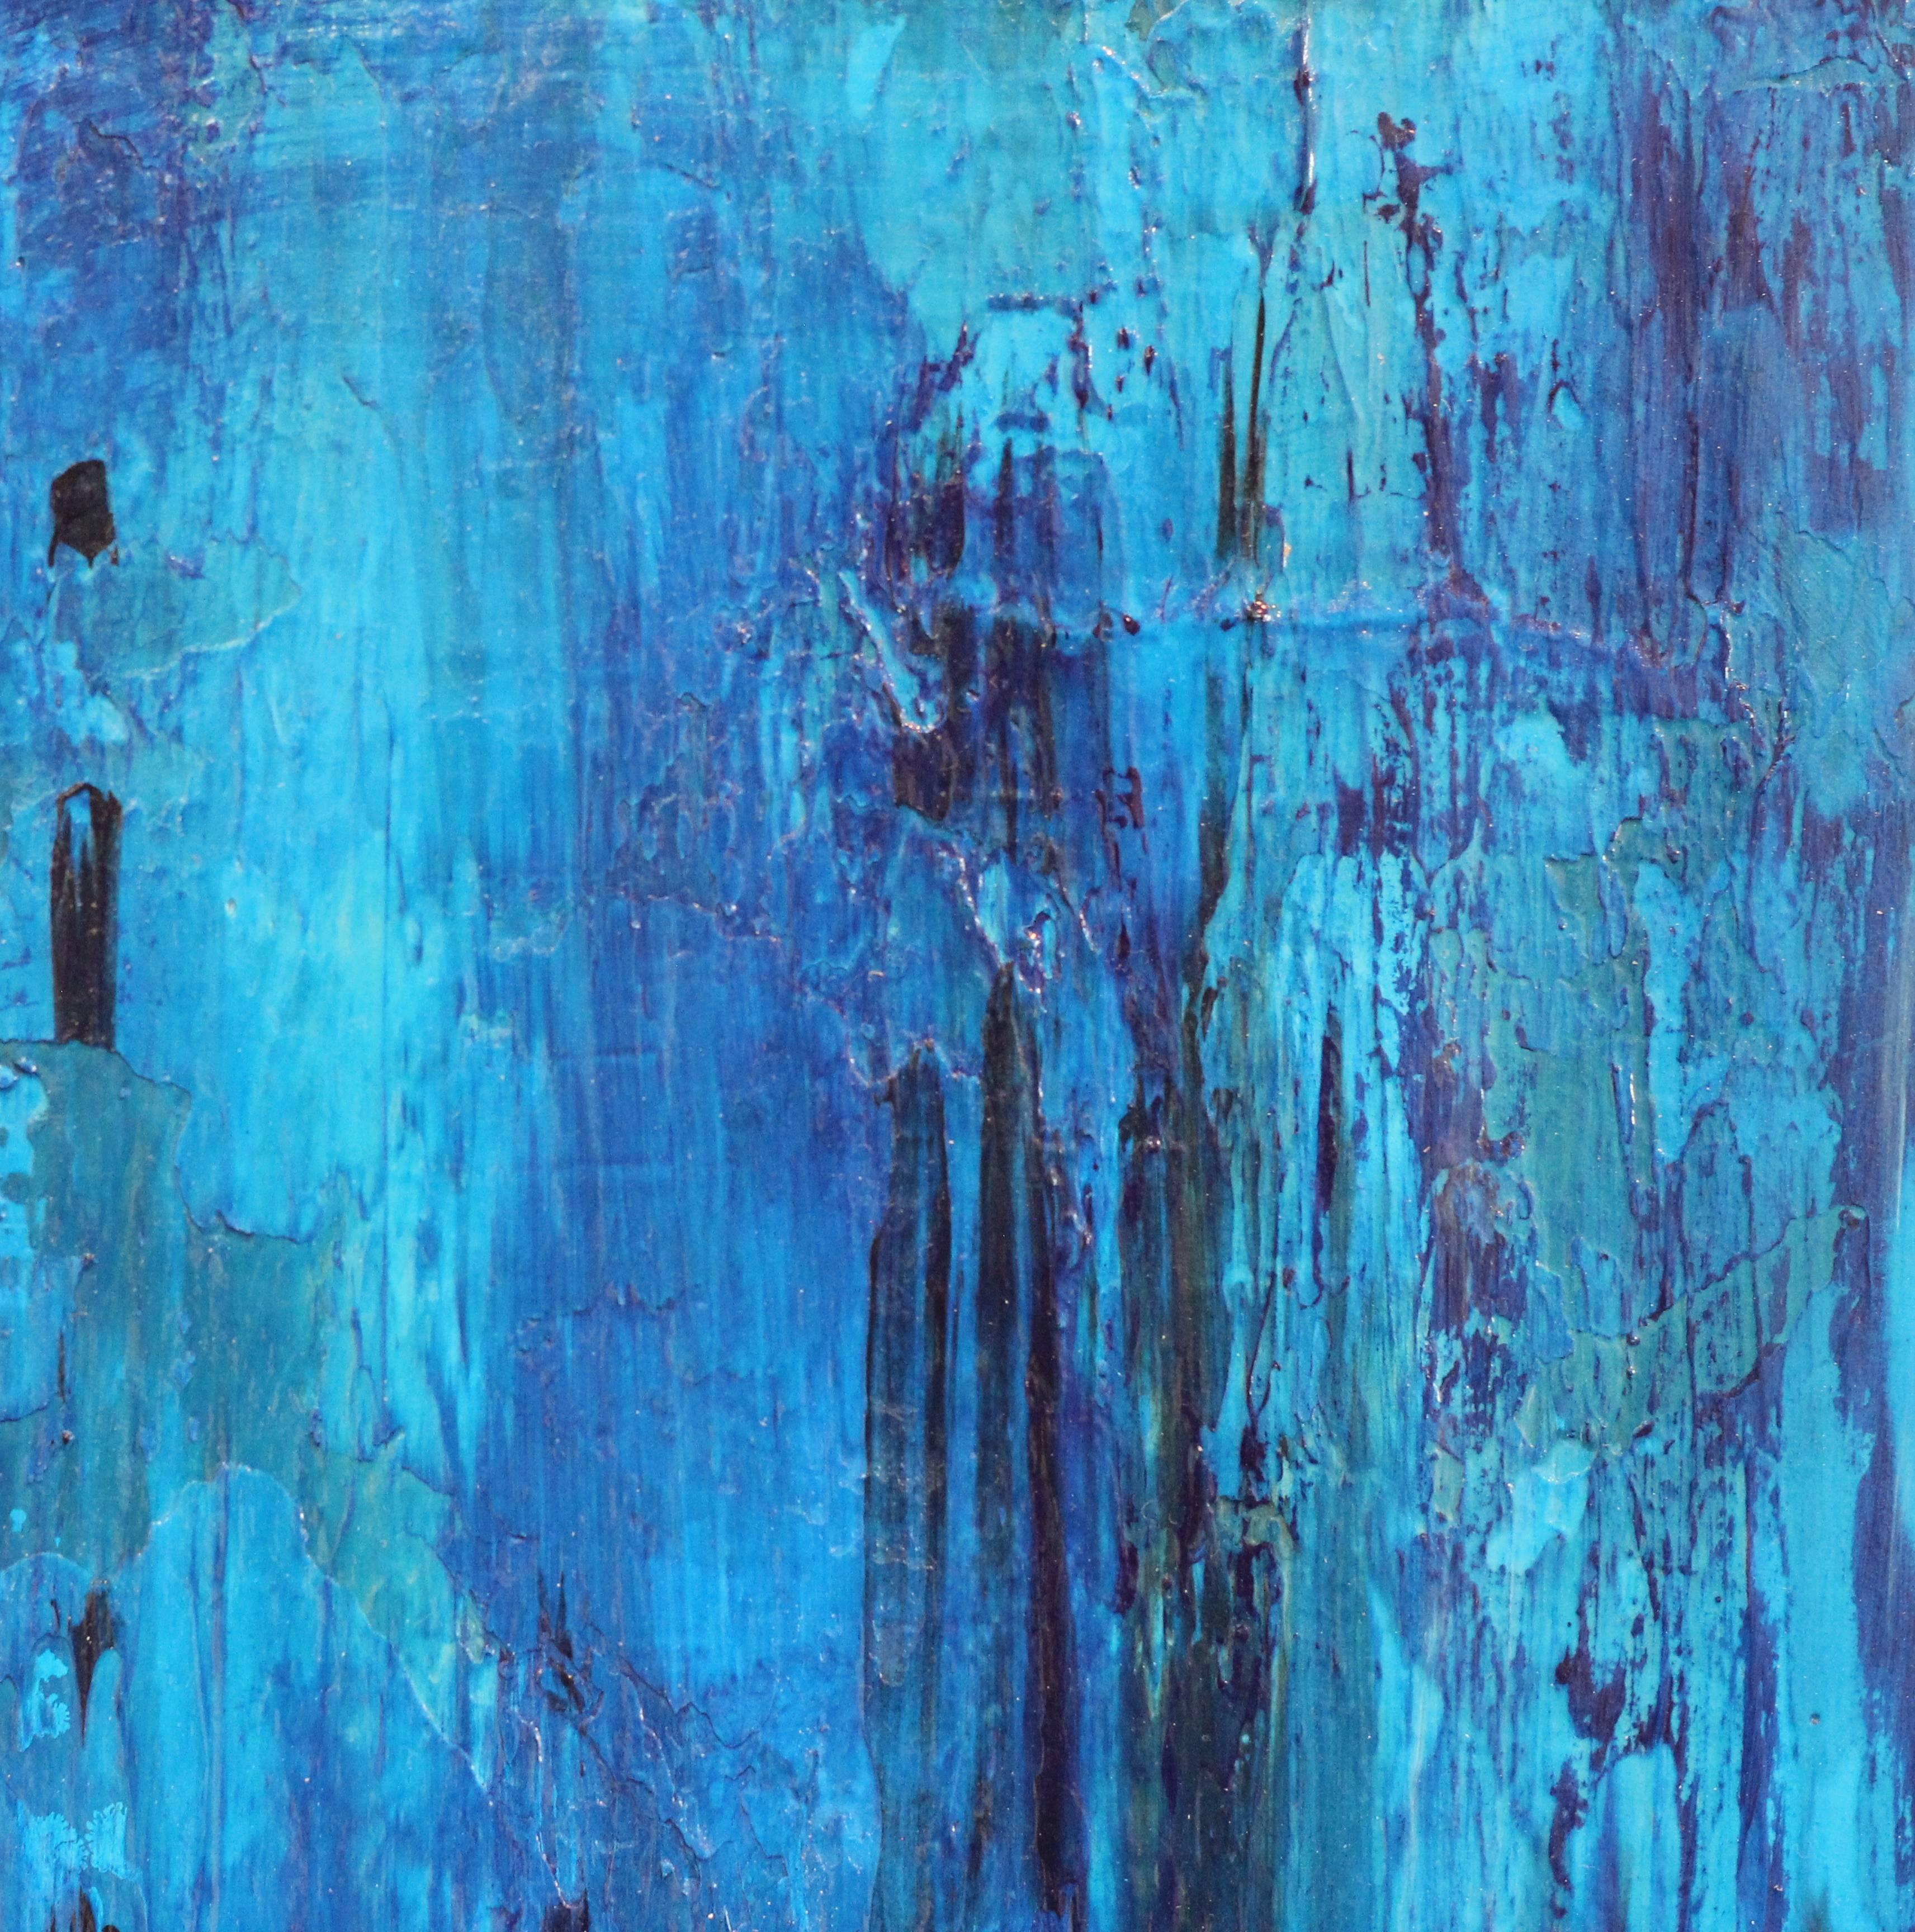 Clara Berta is a passionate, award-winning mixed-media artist of Hungarian heritage. Her dynamic and highly textural abstract works have been exhibited and collected across the United States. 

Clara Berta’s paintings explore themes such as the